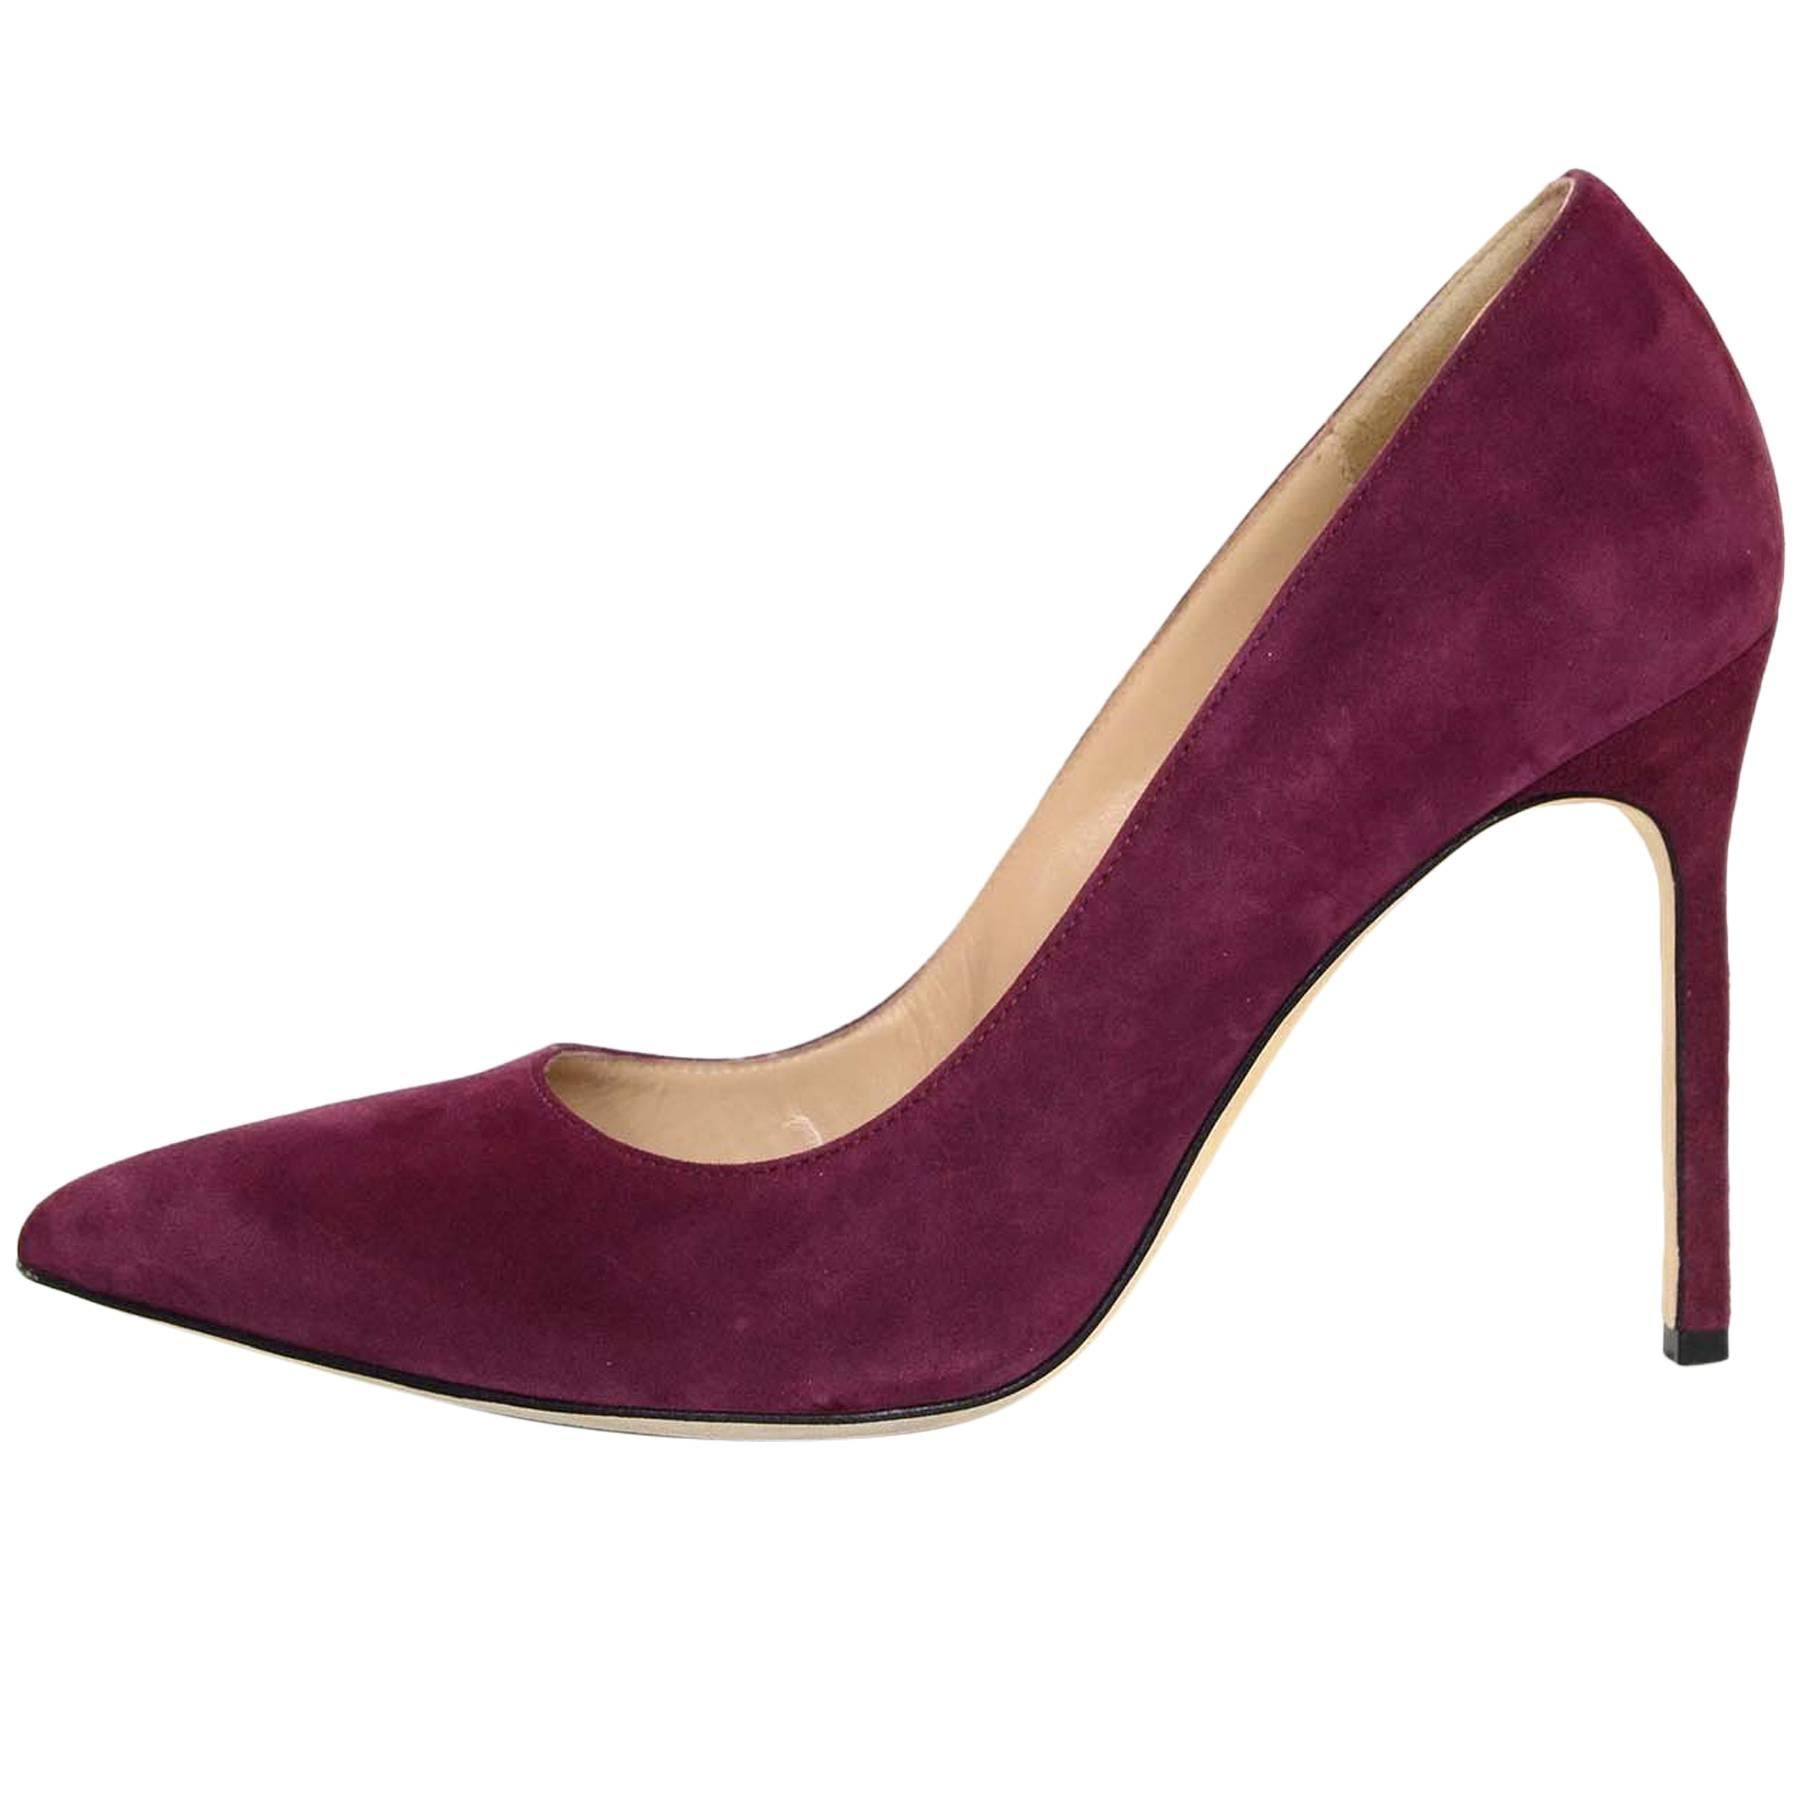 Manolo Blahnik Burgundy Suede BB Pumps Sz 38 with Box and DB